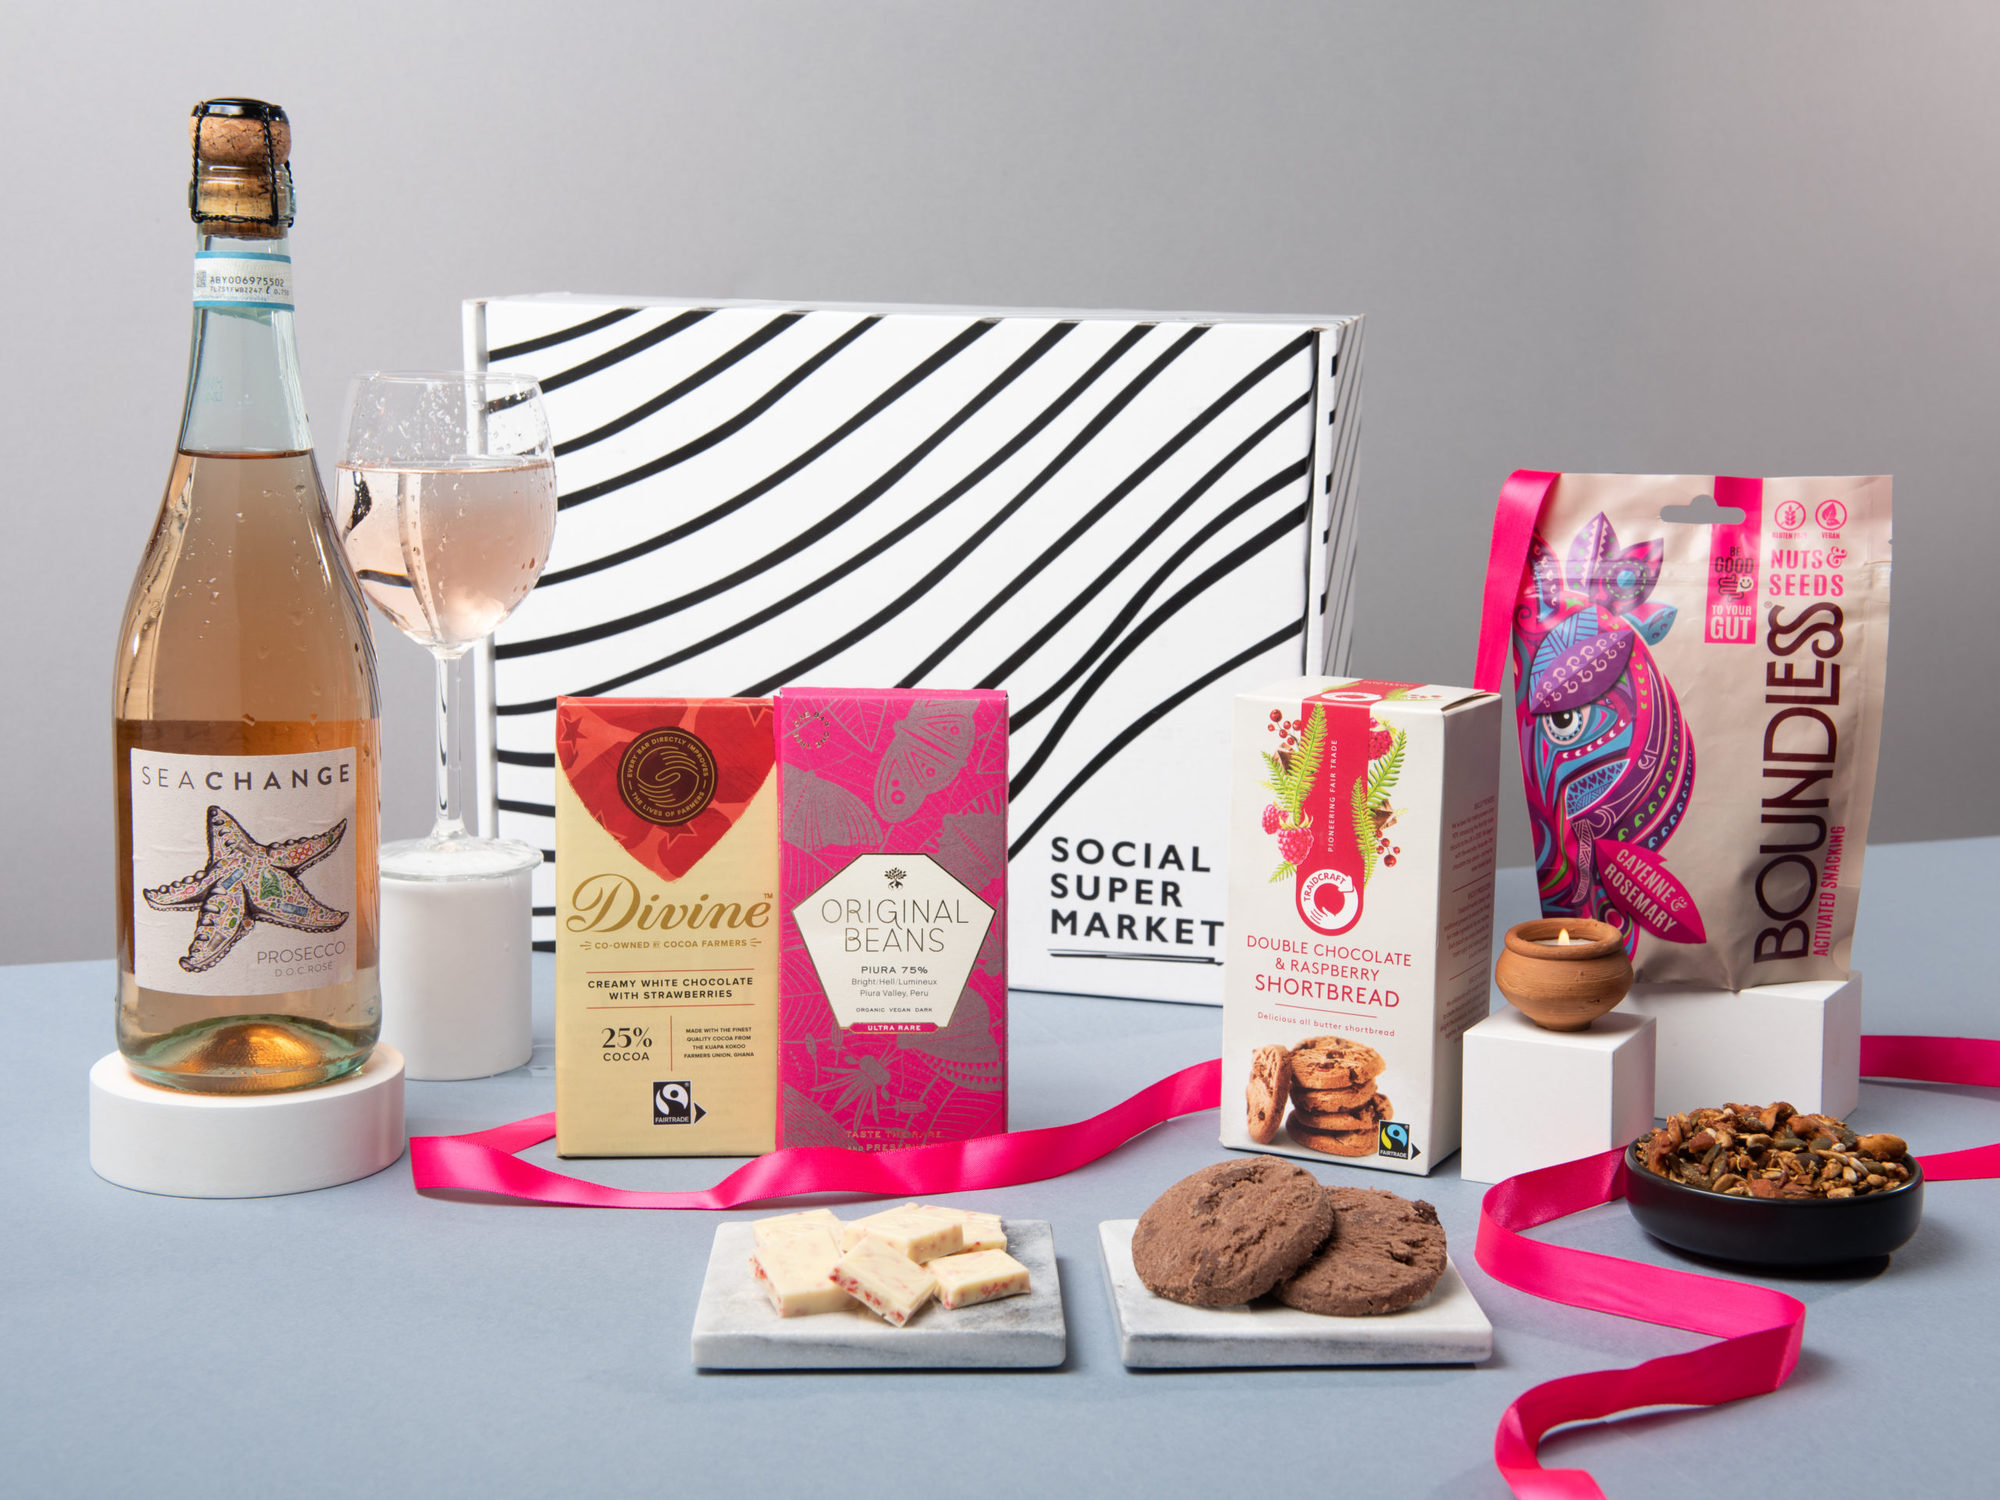 Ethical marketplace Social Supermarket launches its Valentine’s Day gift boxes Featured Image